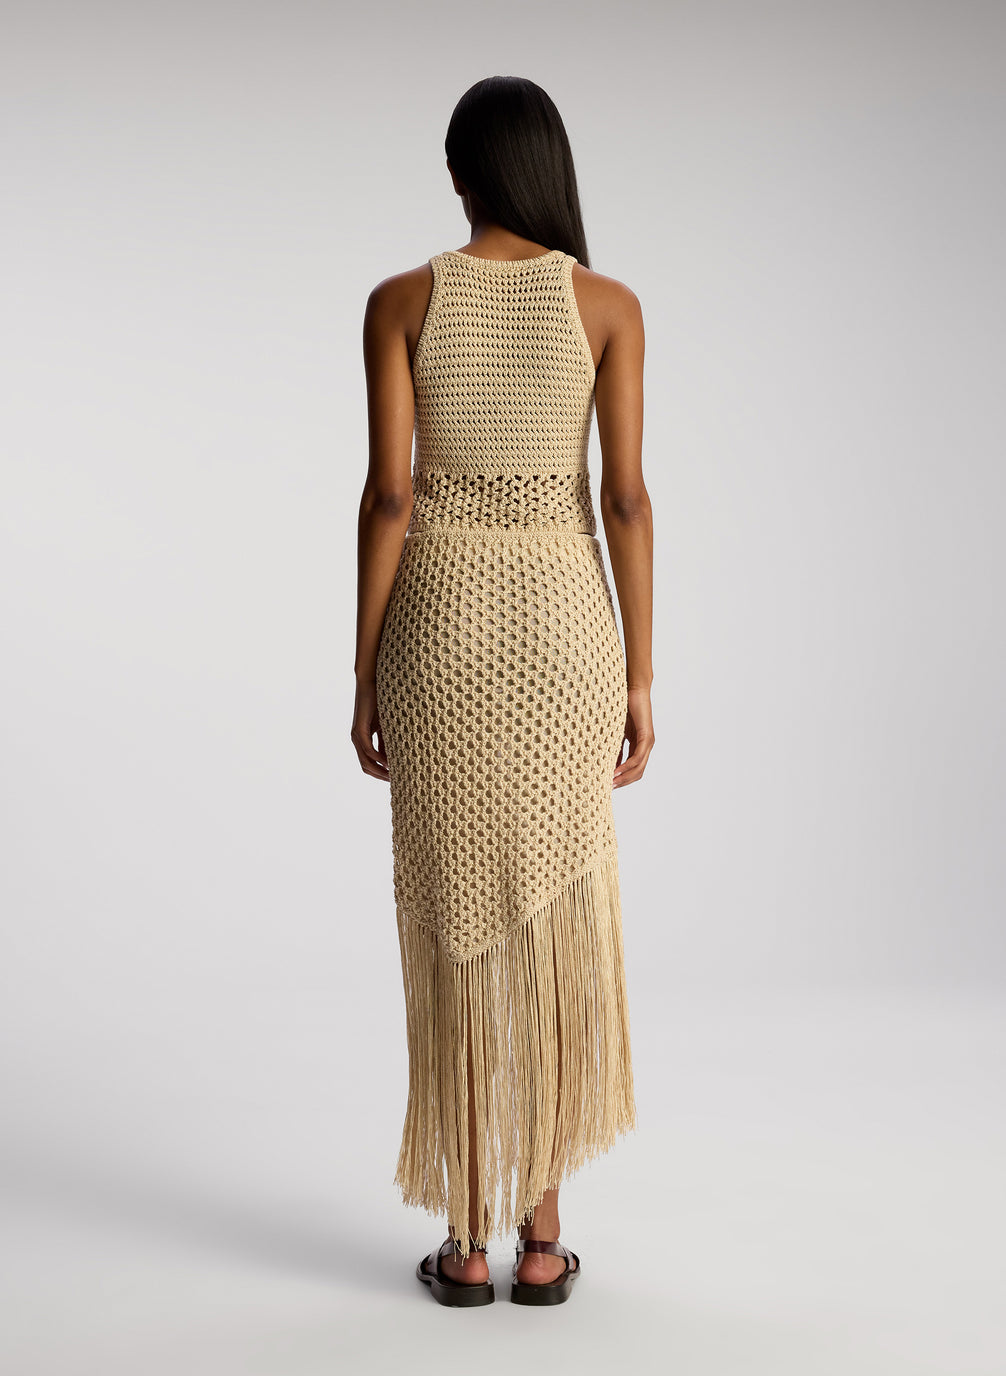 back view of woman wearing tan crochet top and skirt set